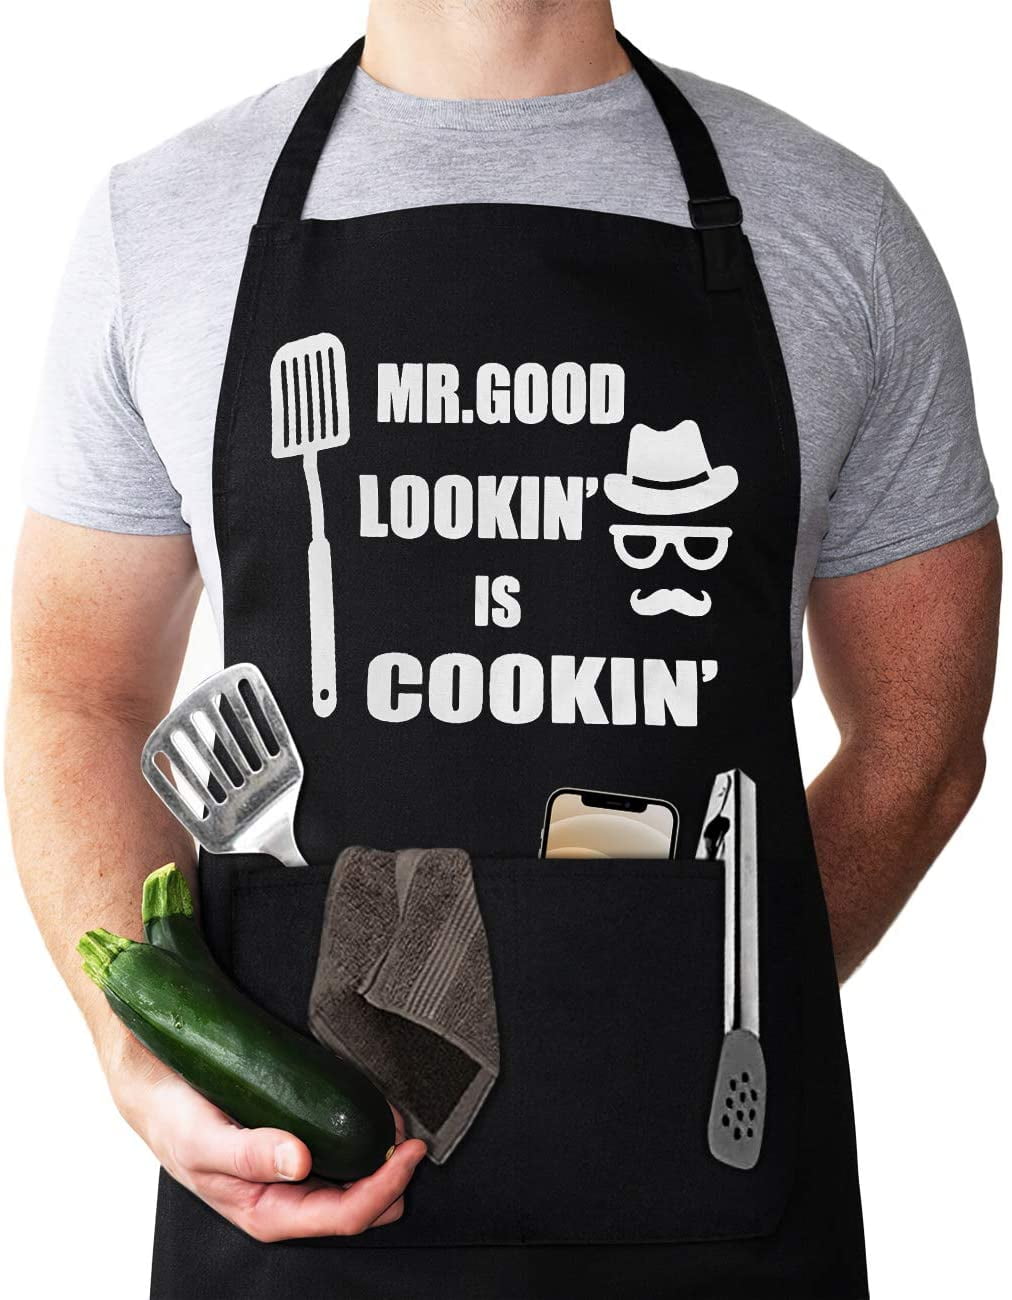 Funny Chef Apron , Mr. Good Lookin is Cookin Apron, BBQ Grill Apron, Mens  apron, 2 Utility Pockets, Adjustable Neck and Extra Long Waist Ties. Best  for Cooking, Grilling, Mens gifts for